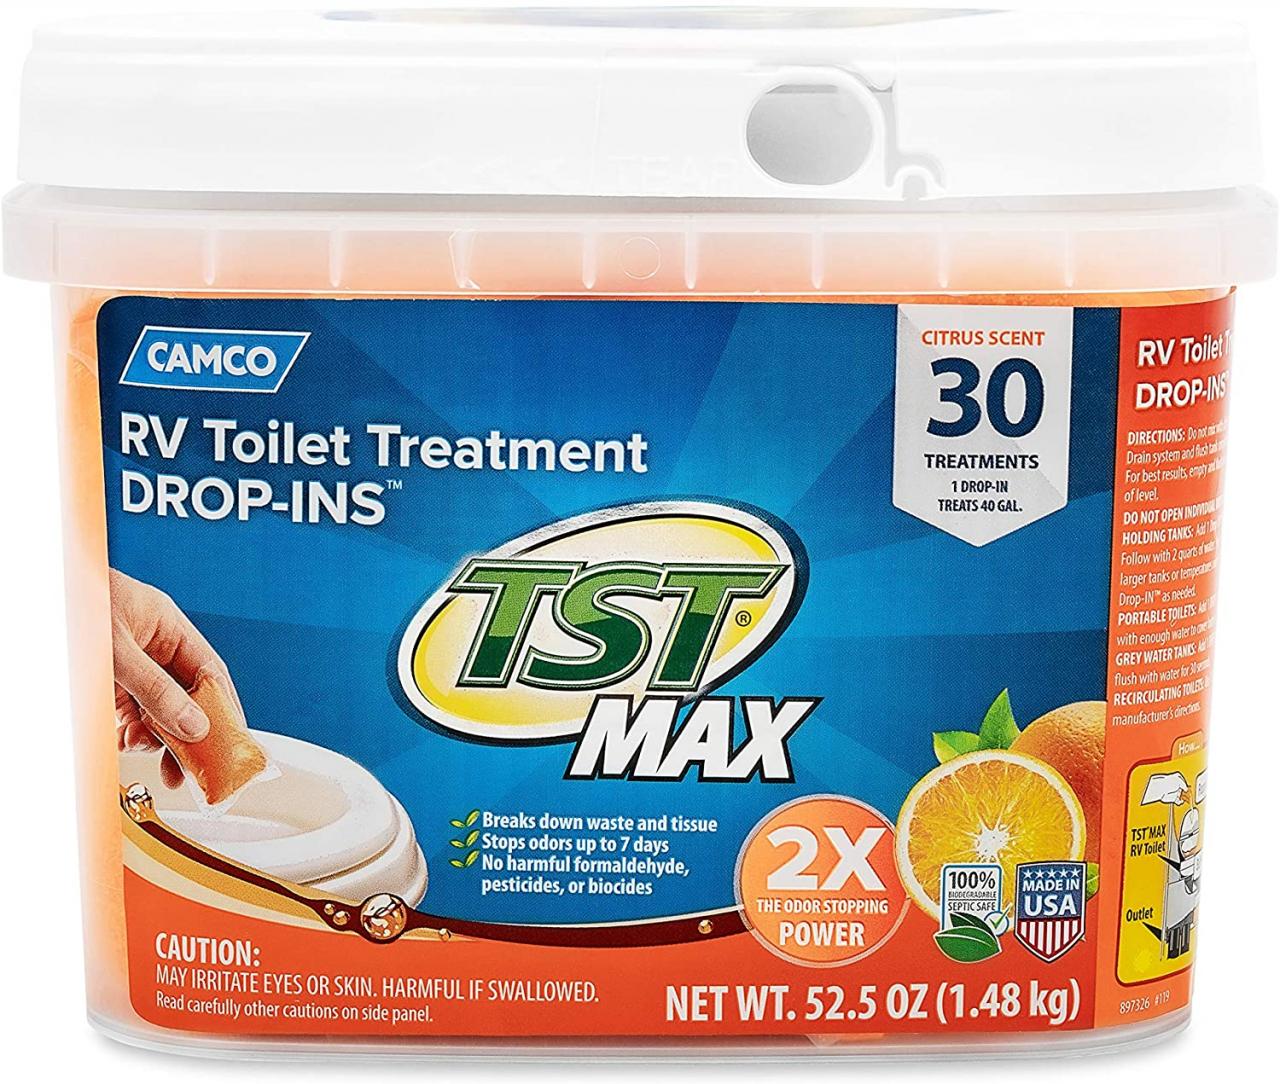 Buy Camco TST Ultra-Concentrated Orange Citrus Scent RV Toilet Treatment  Drop-Ins, Formaldehyde Free, Breaks Down Waste And Tissue, Septic Tank  Safe, 30-Pack (41183) Online in Hong Kong. B016V2B1Z8